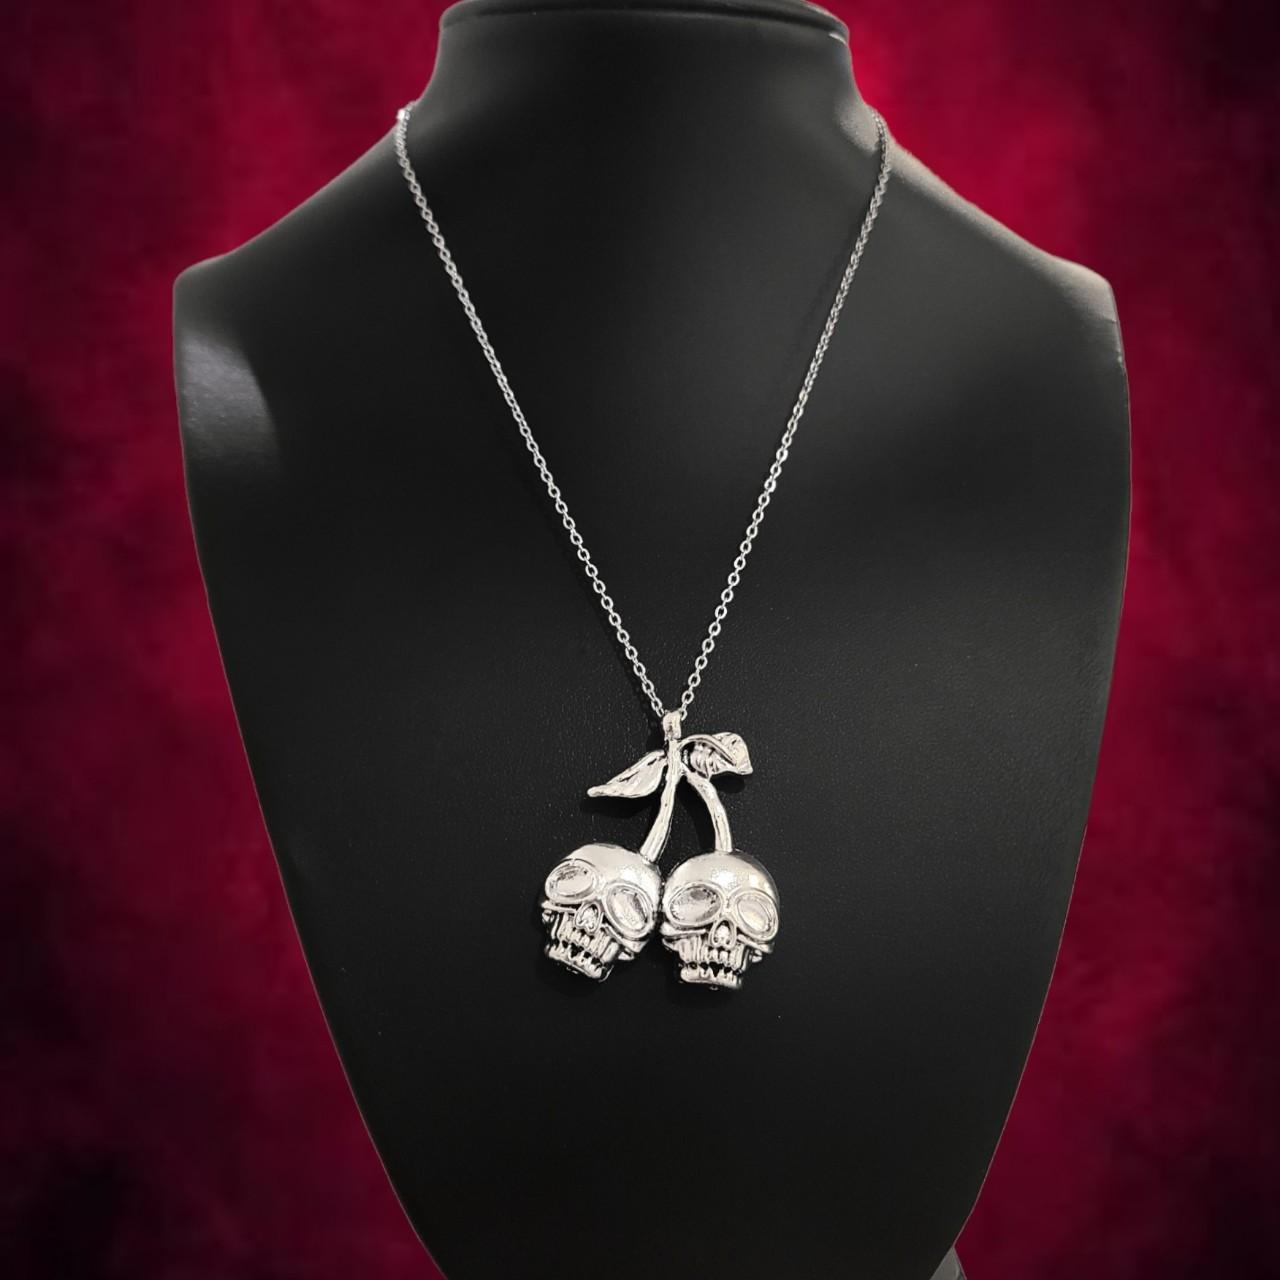 Product Image 4 - 18" Skull Cherry Necklace 
...
Stainless